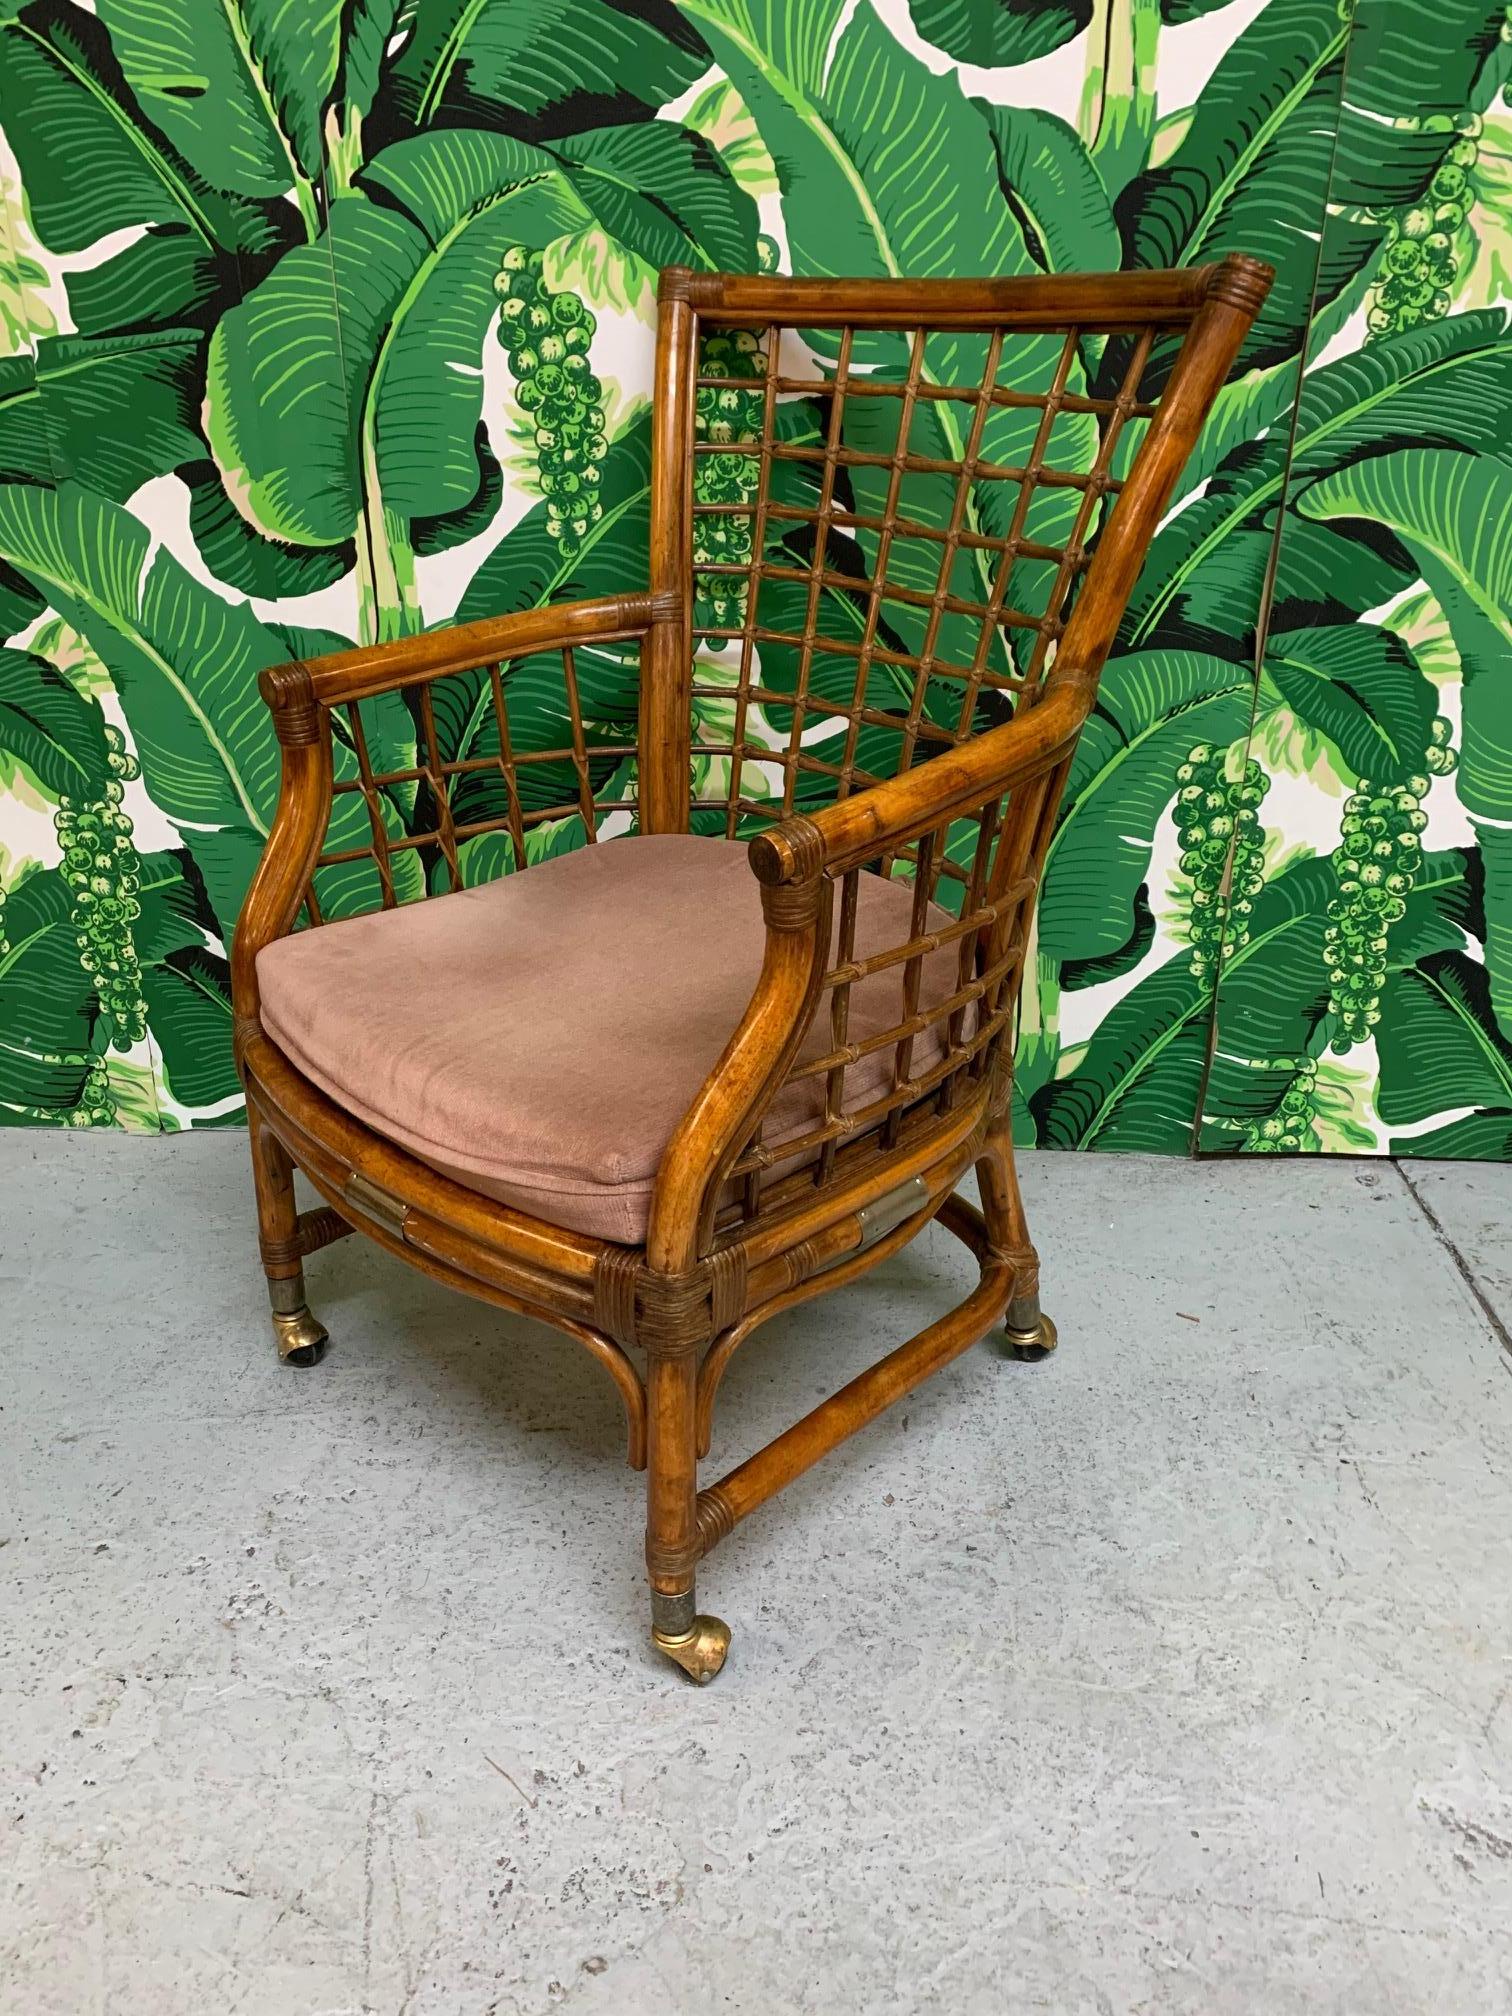 Set of four midcentury rattan dining chairs feature a rich, deep brown finish and brass accents. Chairs roll on original brass casters (can be removed). Very good vintage condition with minor imperfections consistent with age.
   